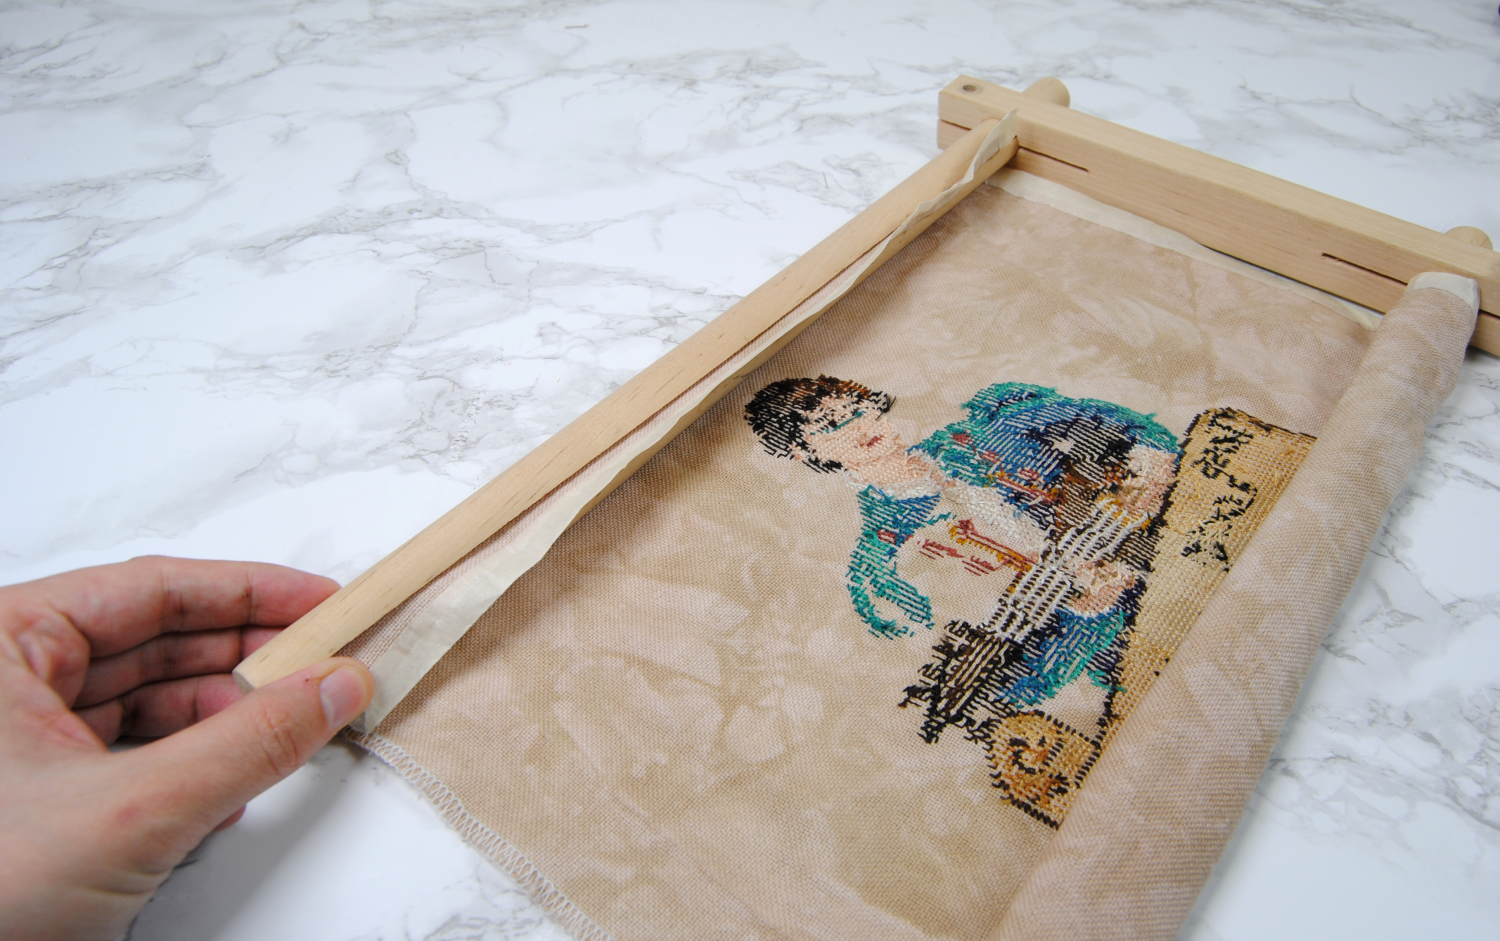 Embroidery Snap Frame